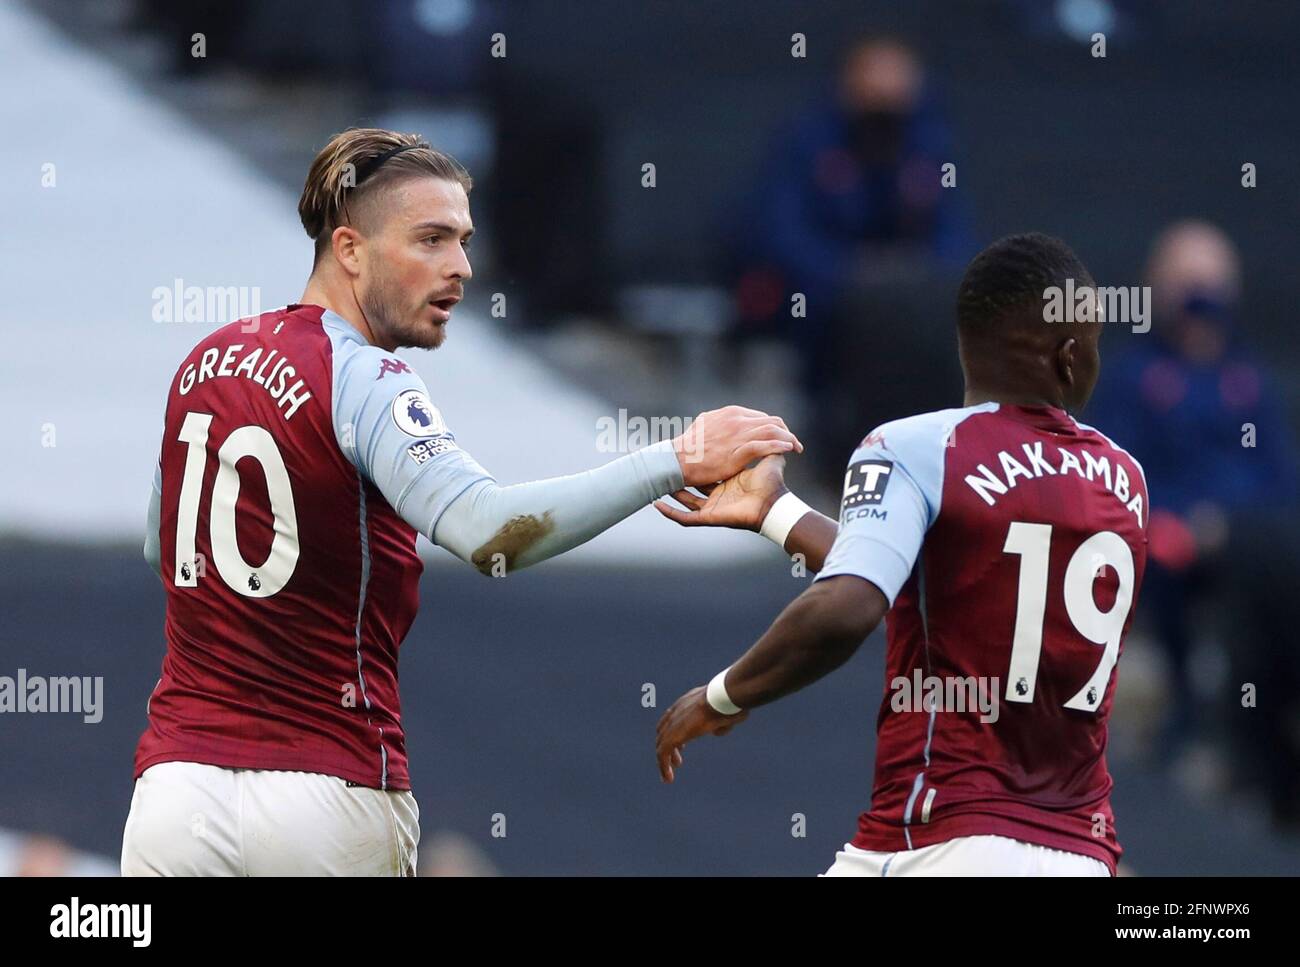 Aston Villa's Jack Grealish (left) and Marvelous Nakamba celebrate their side's first goal of the game, an own goal scored by Tottenham Hotspur's Sergio Reguilon (not pictured) during the Premier League match at the Tottenham Hotspur Stadium, London. Picture date: Wednesday May 19, 2021. Stock Photo